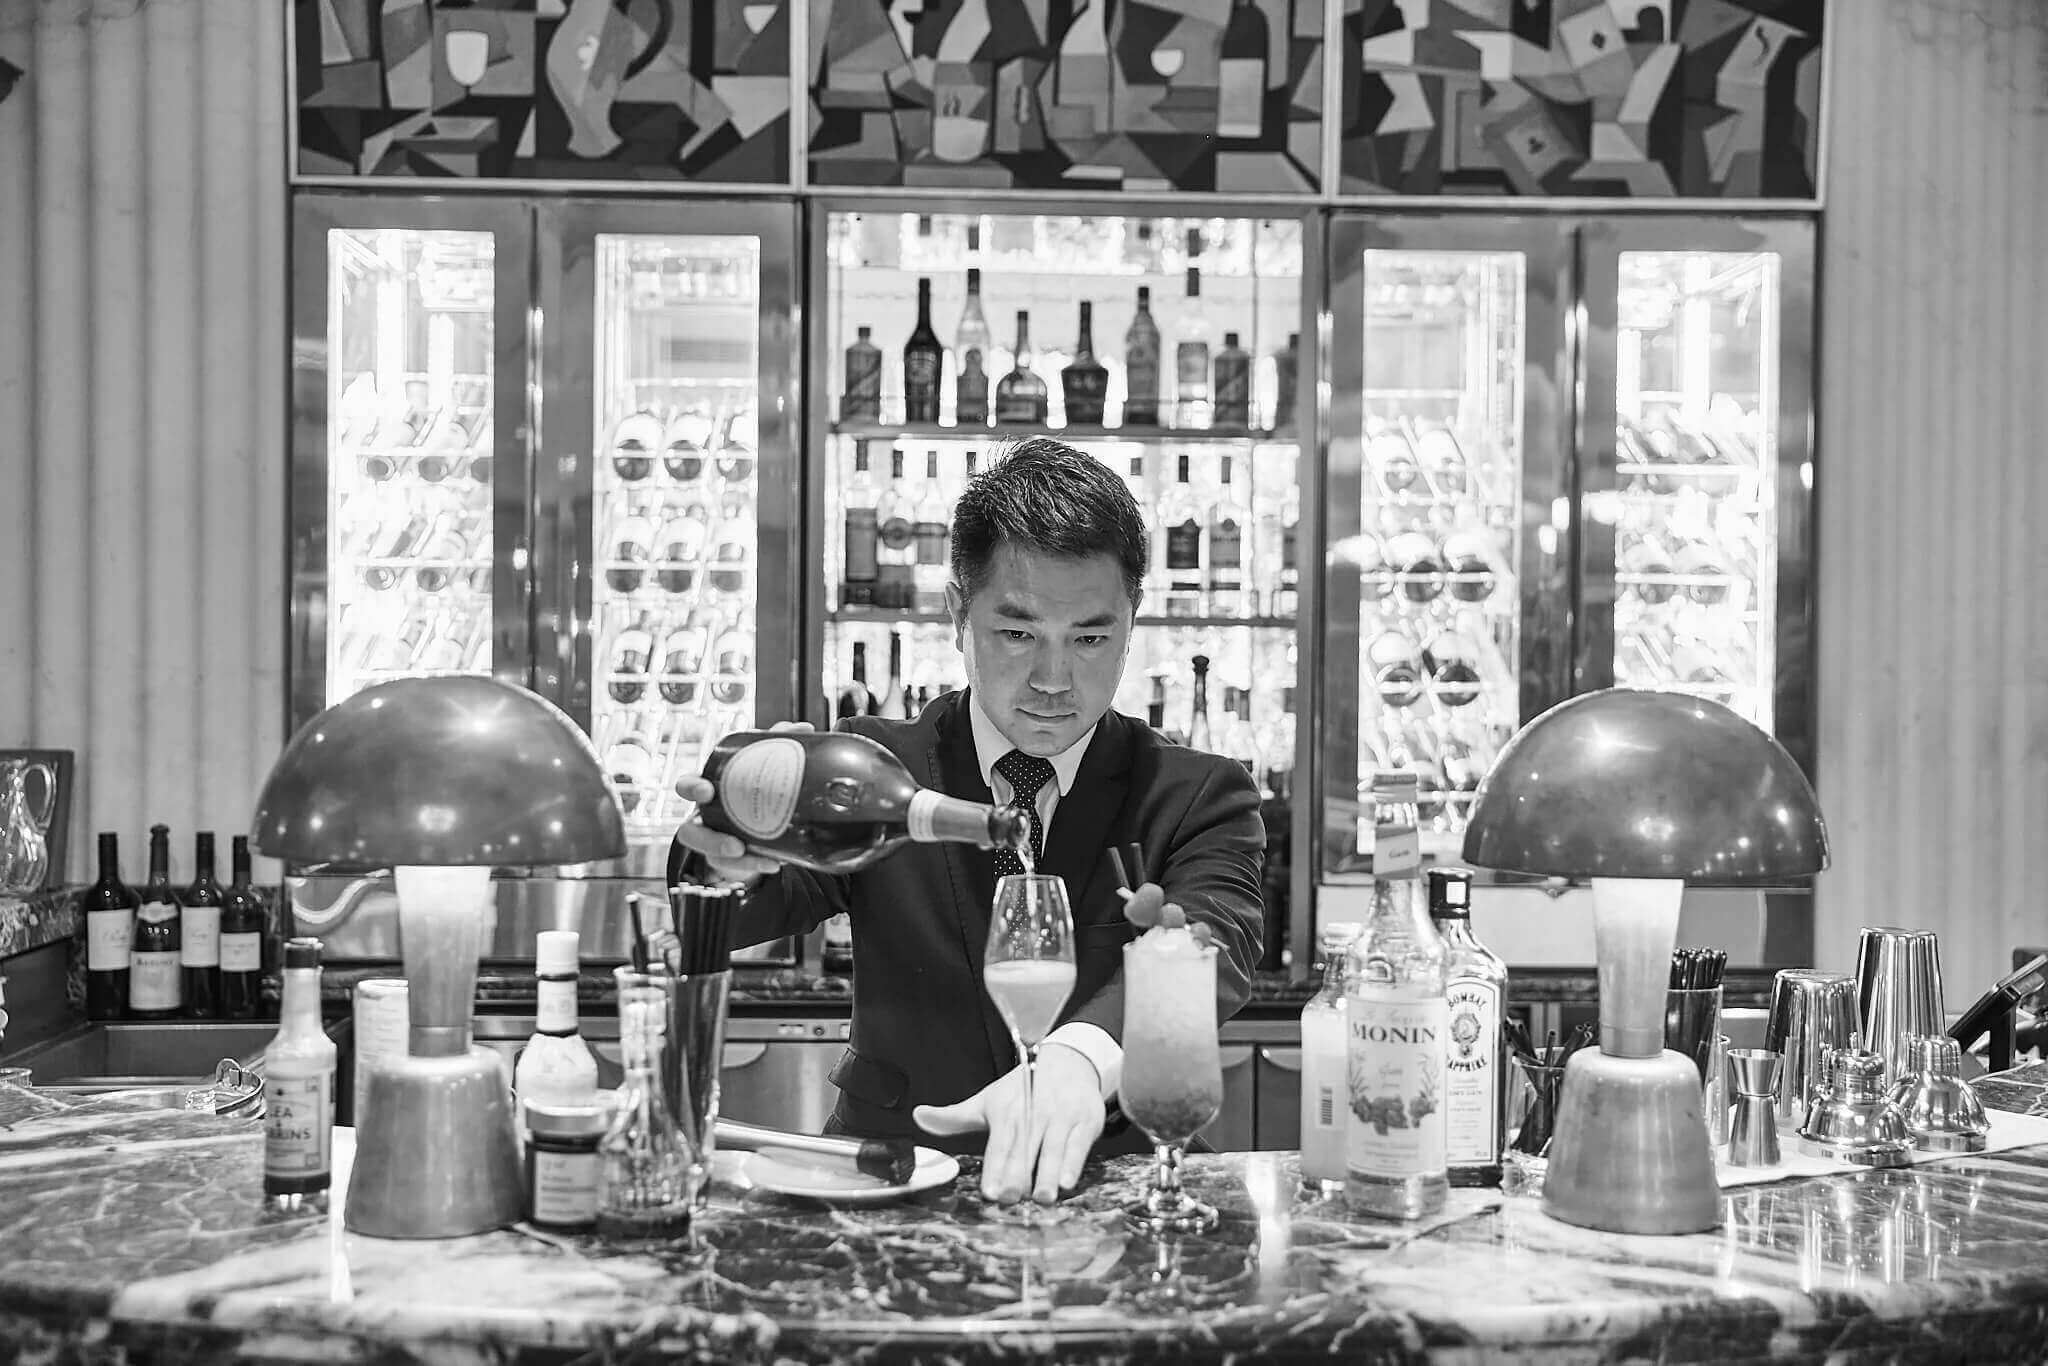 A man pouring champagne at a bar